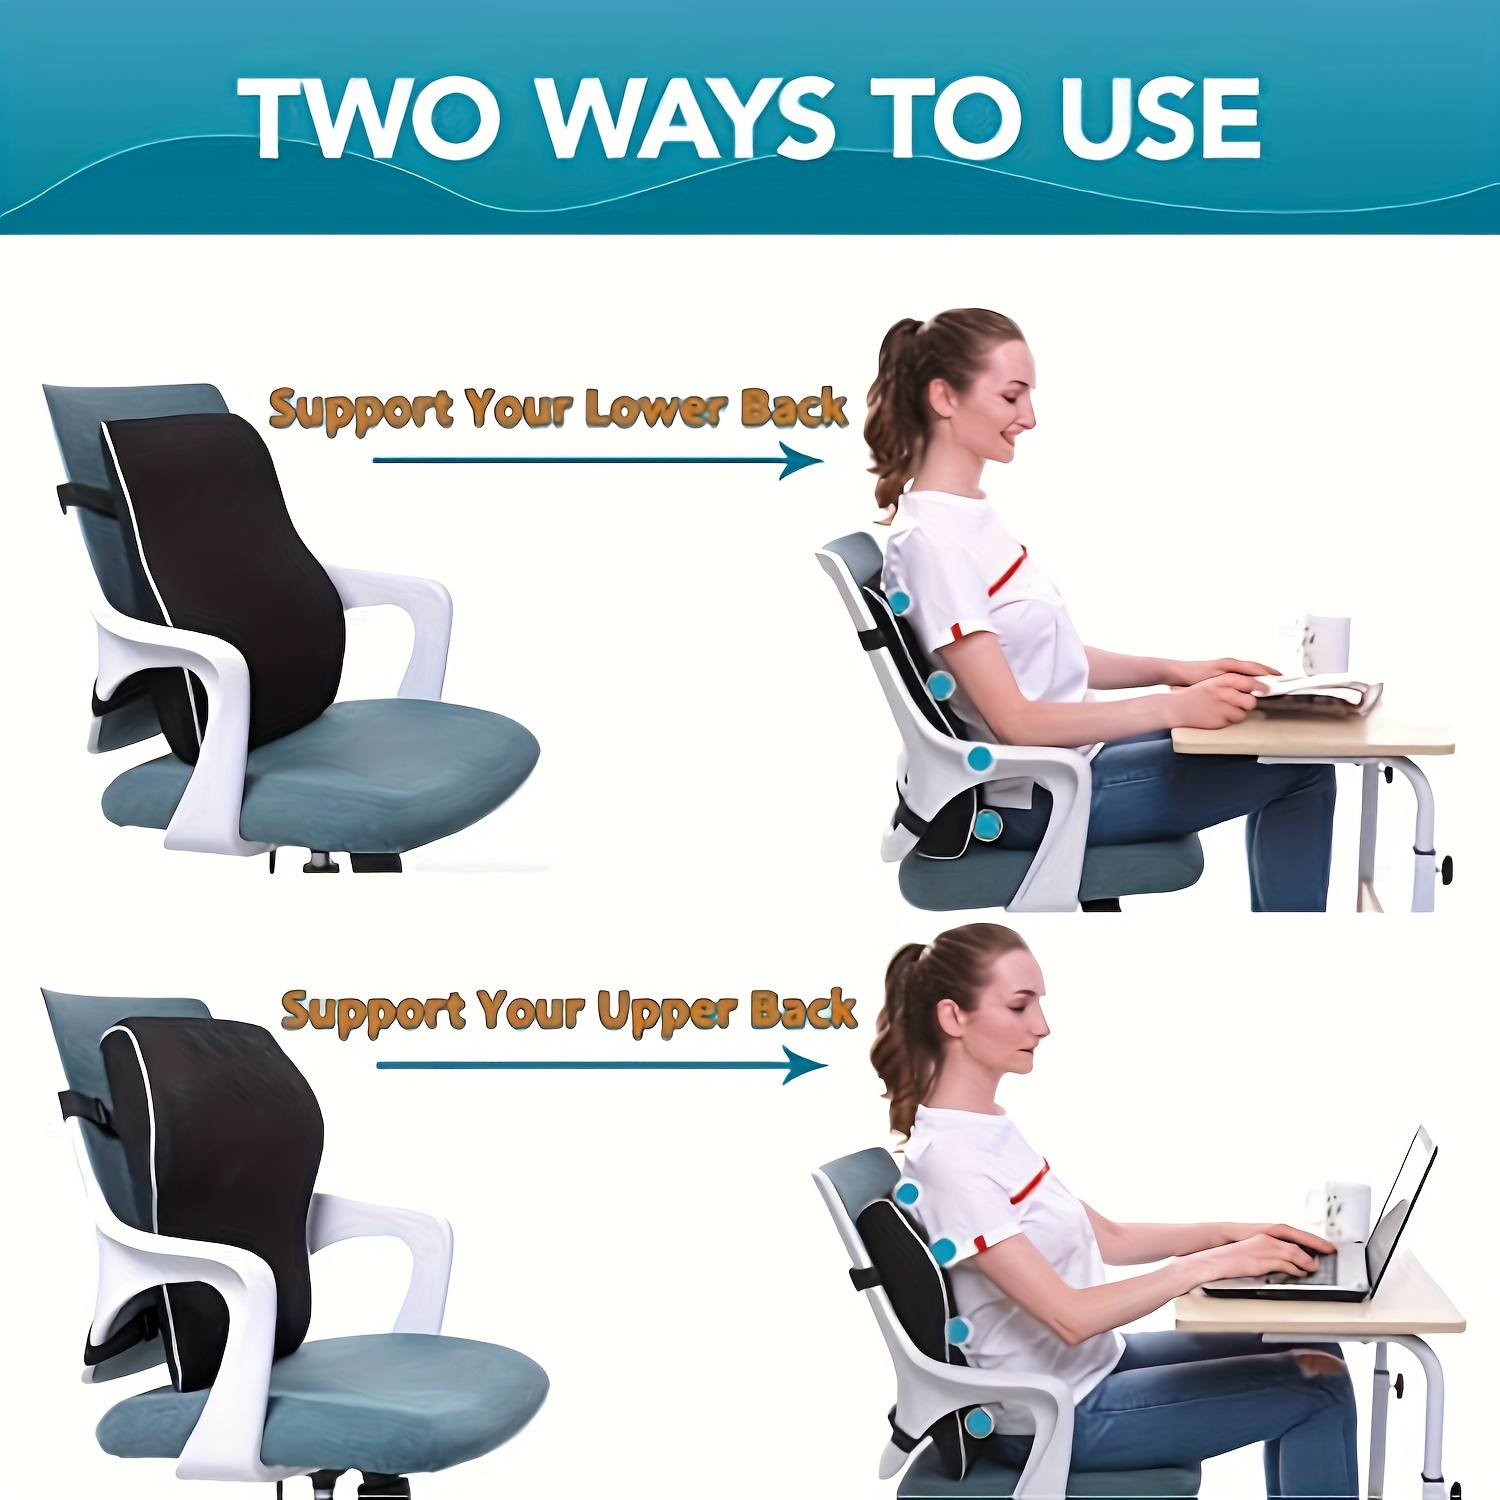 Lumbar Support Pillow, Memory Foam Lumbar Pillow That Can Relieve Low Back  Pain, Used for Lumbar Support Cushion for Office Chairs, Recliners, and Car